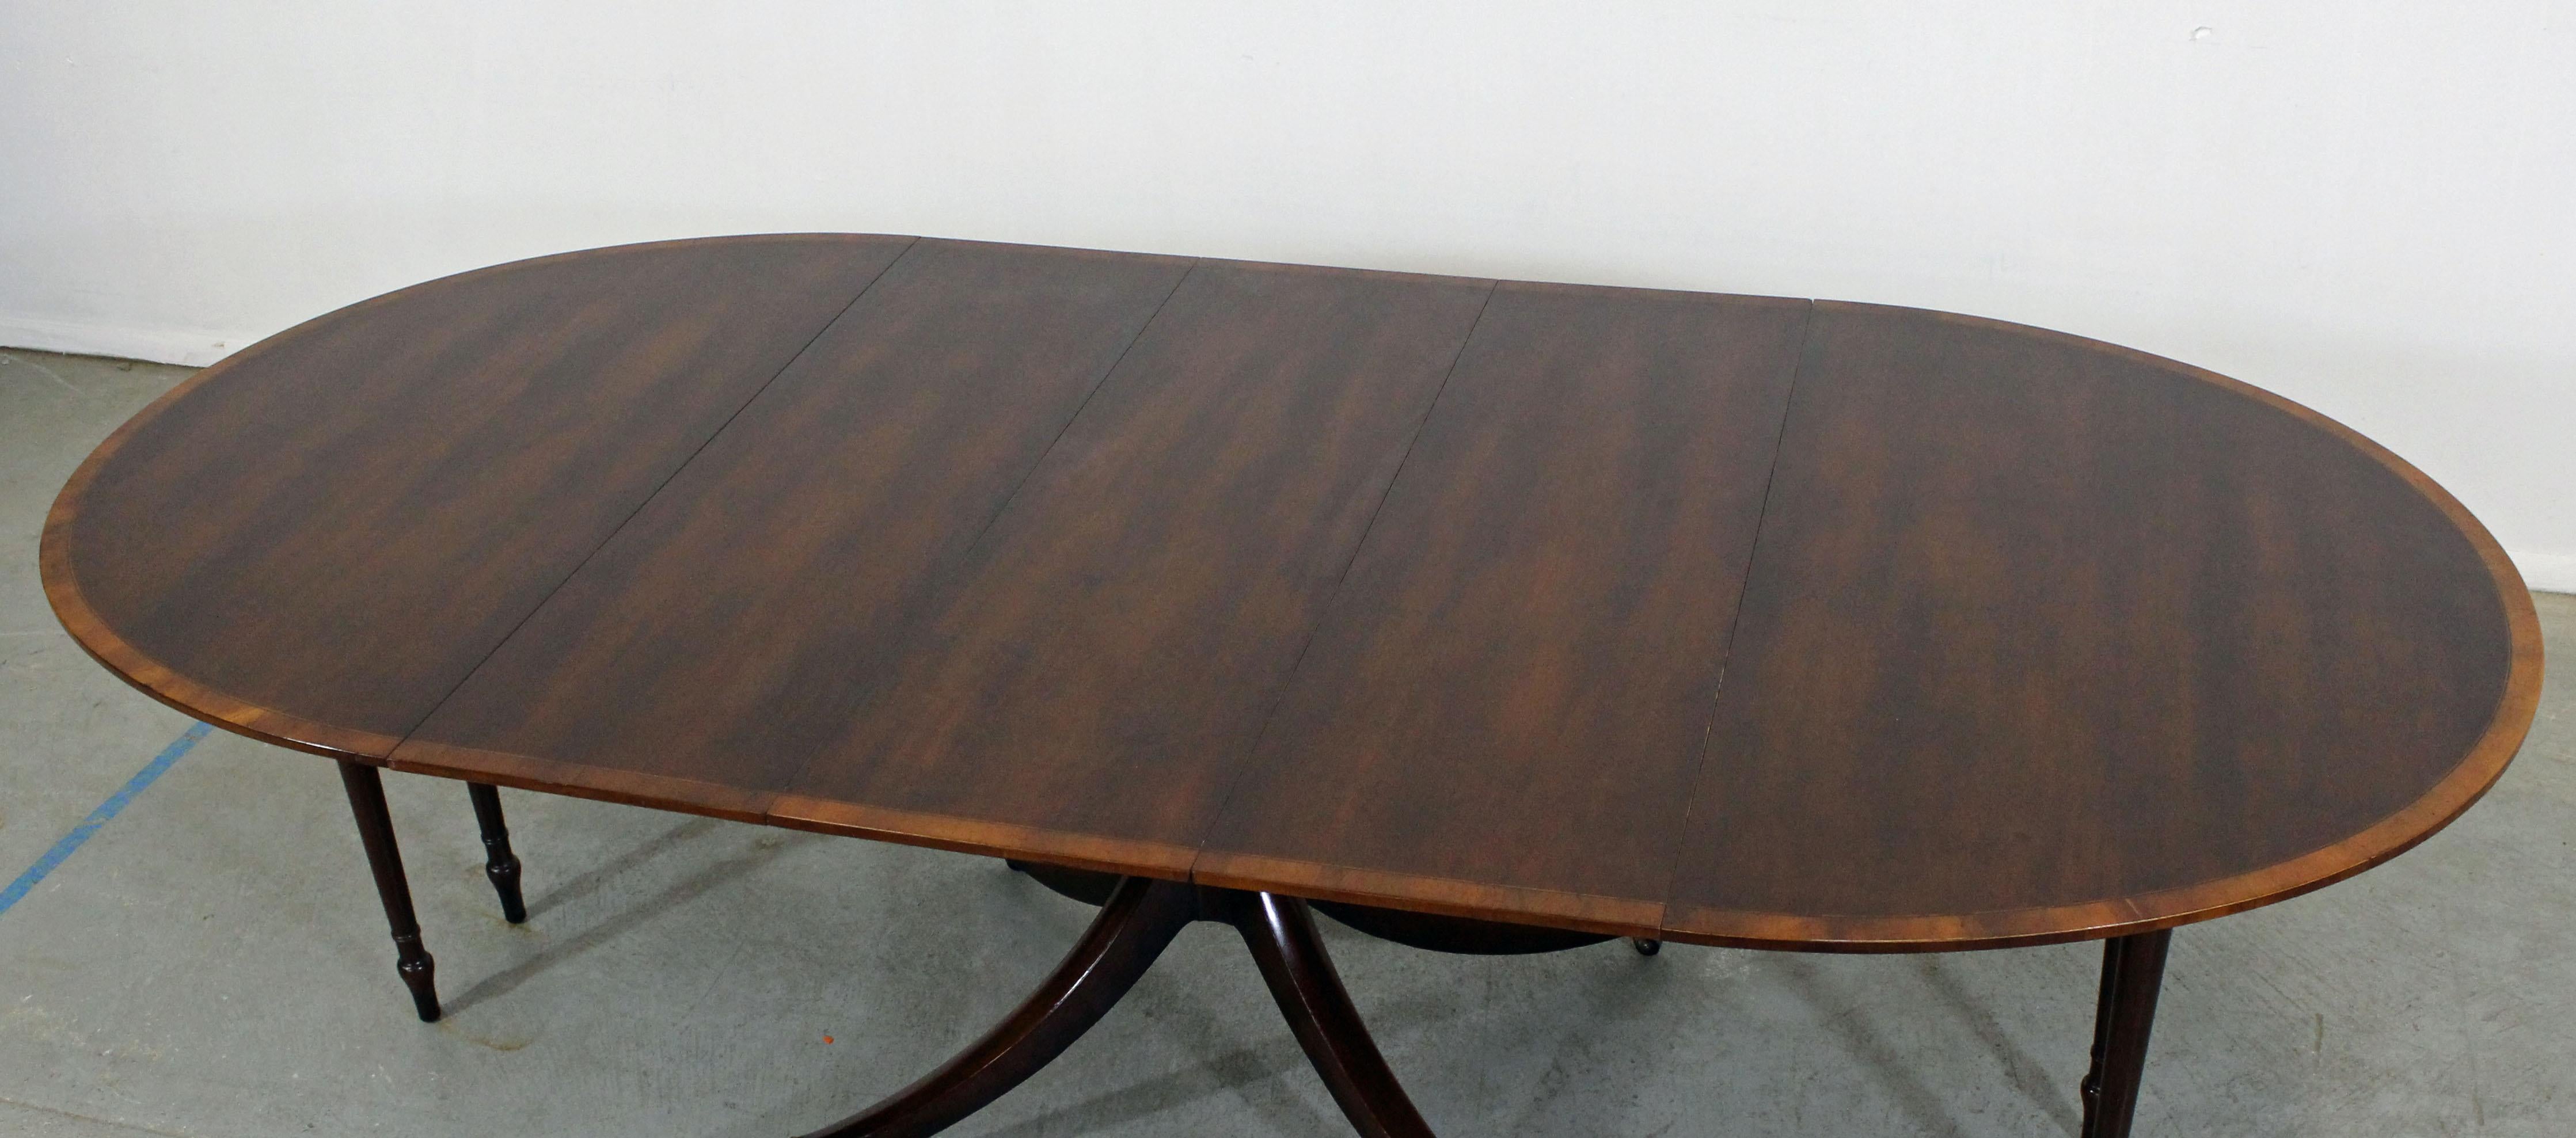 baker extendable dining table